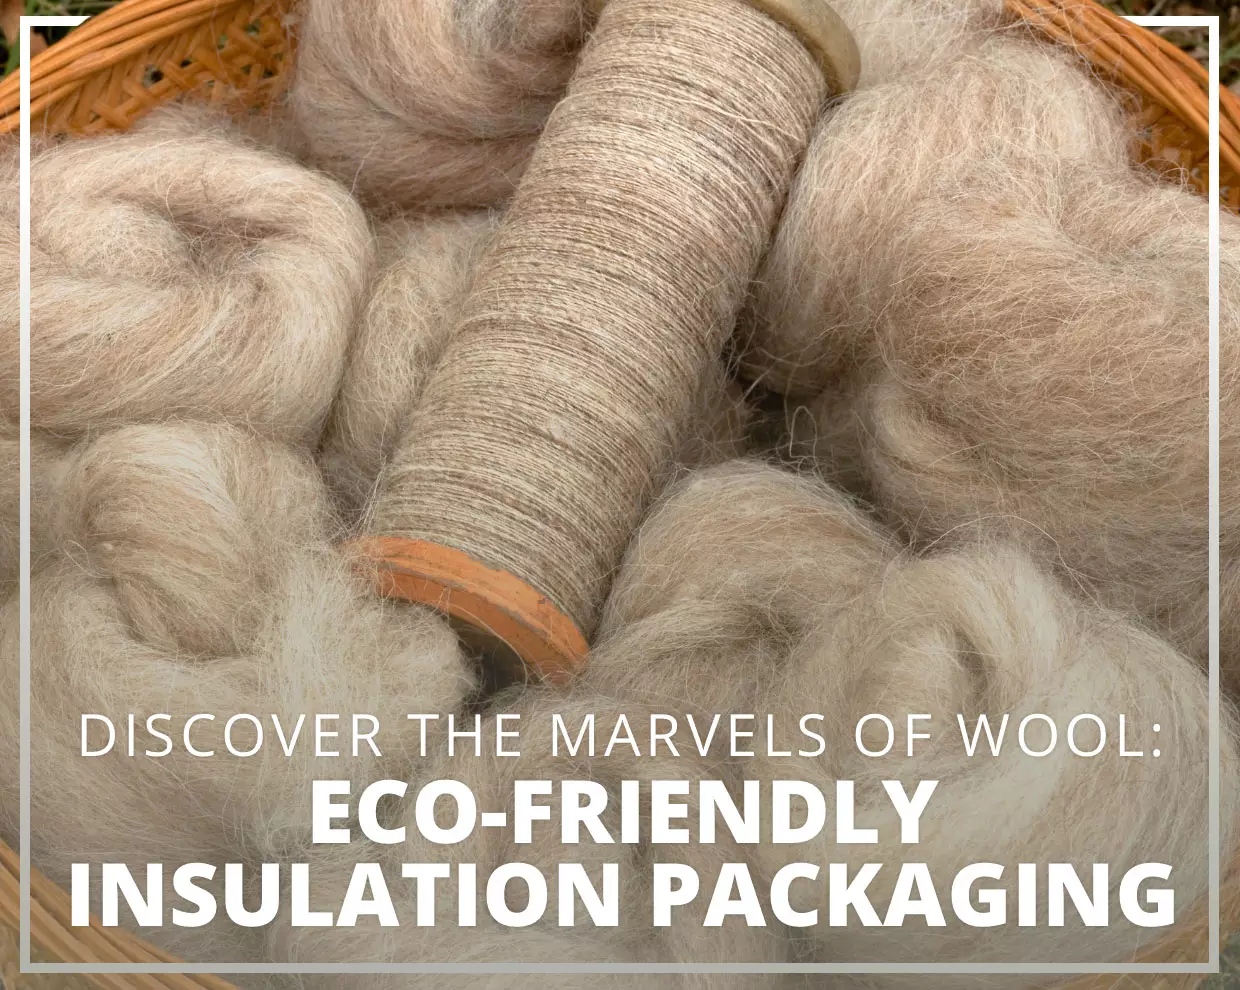 Wool You Believe It? - The Insulating Marvel of 100% Pure Wool Packaging